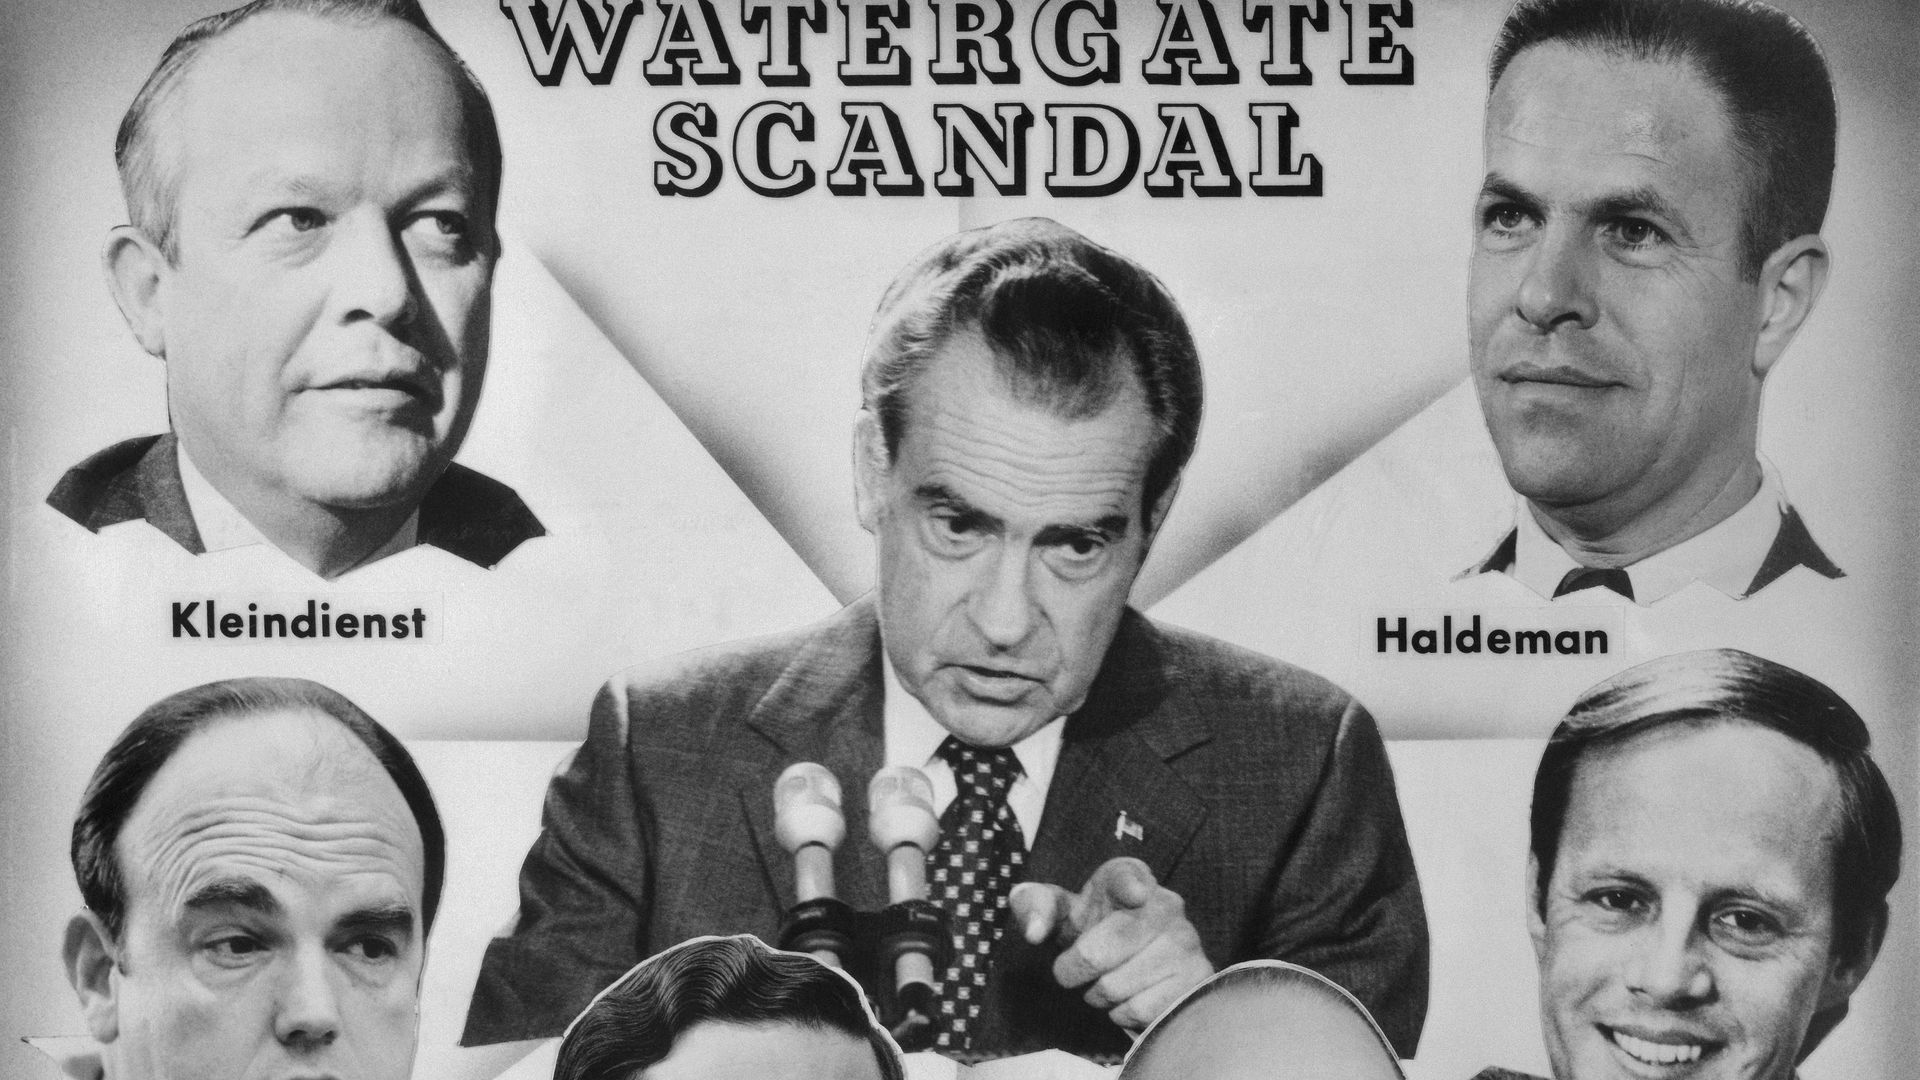 The watergate scandal